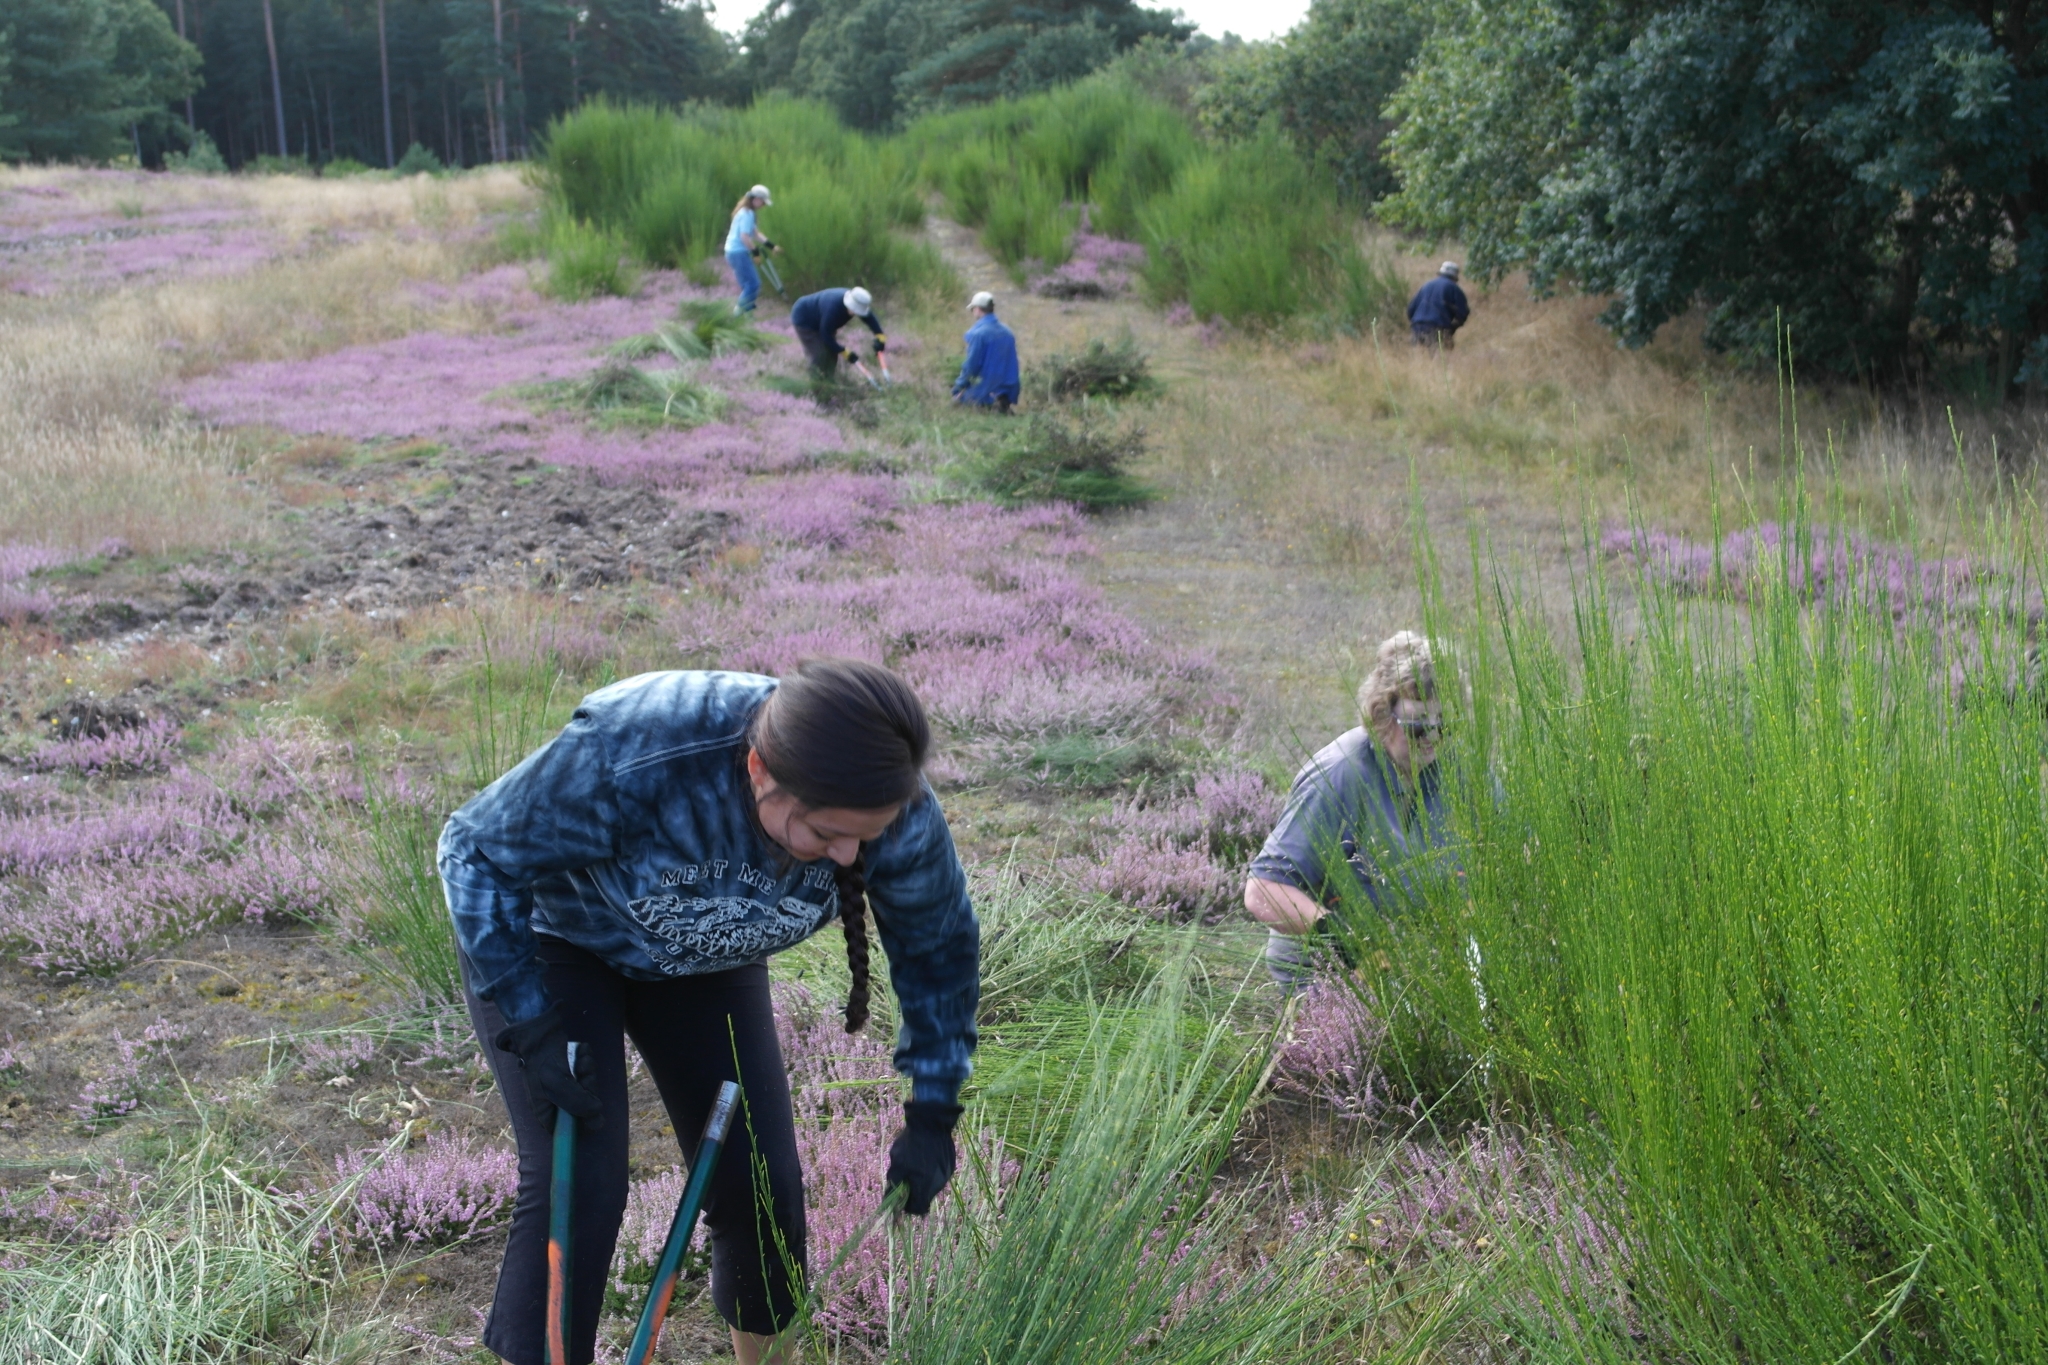 A photo from the FoTF Conservation Event - August 2019 - Broom and Scrub Removal at Santon Street, Santon Downham : Volunteers remove Broom and scrub